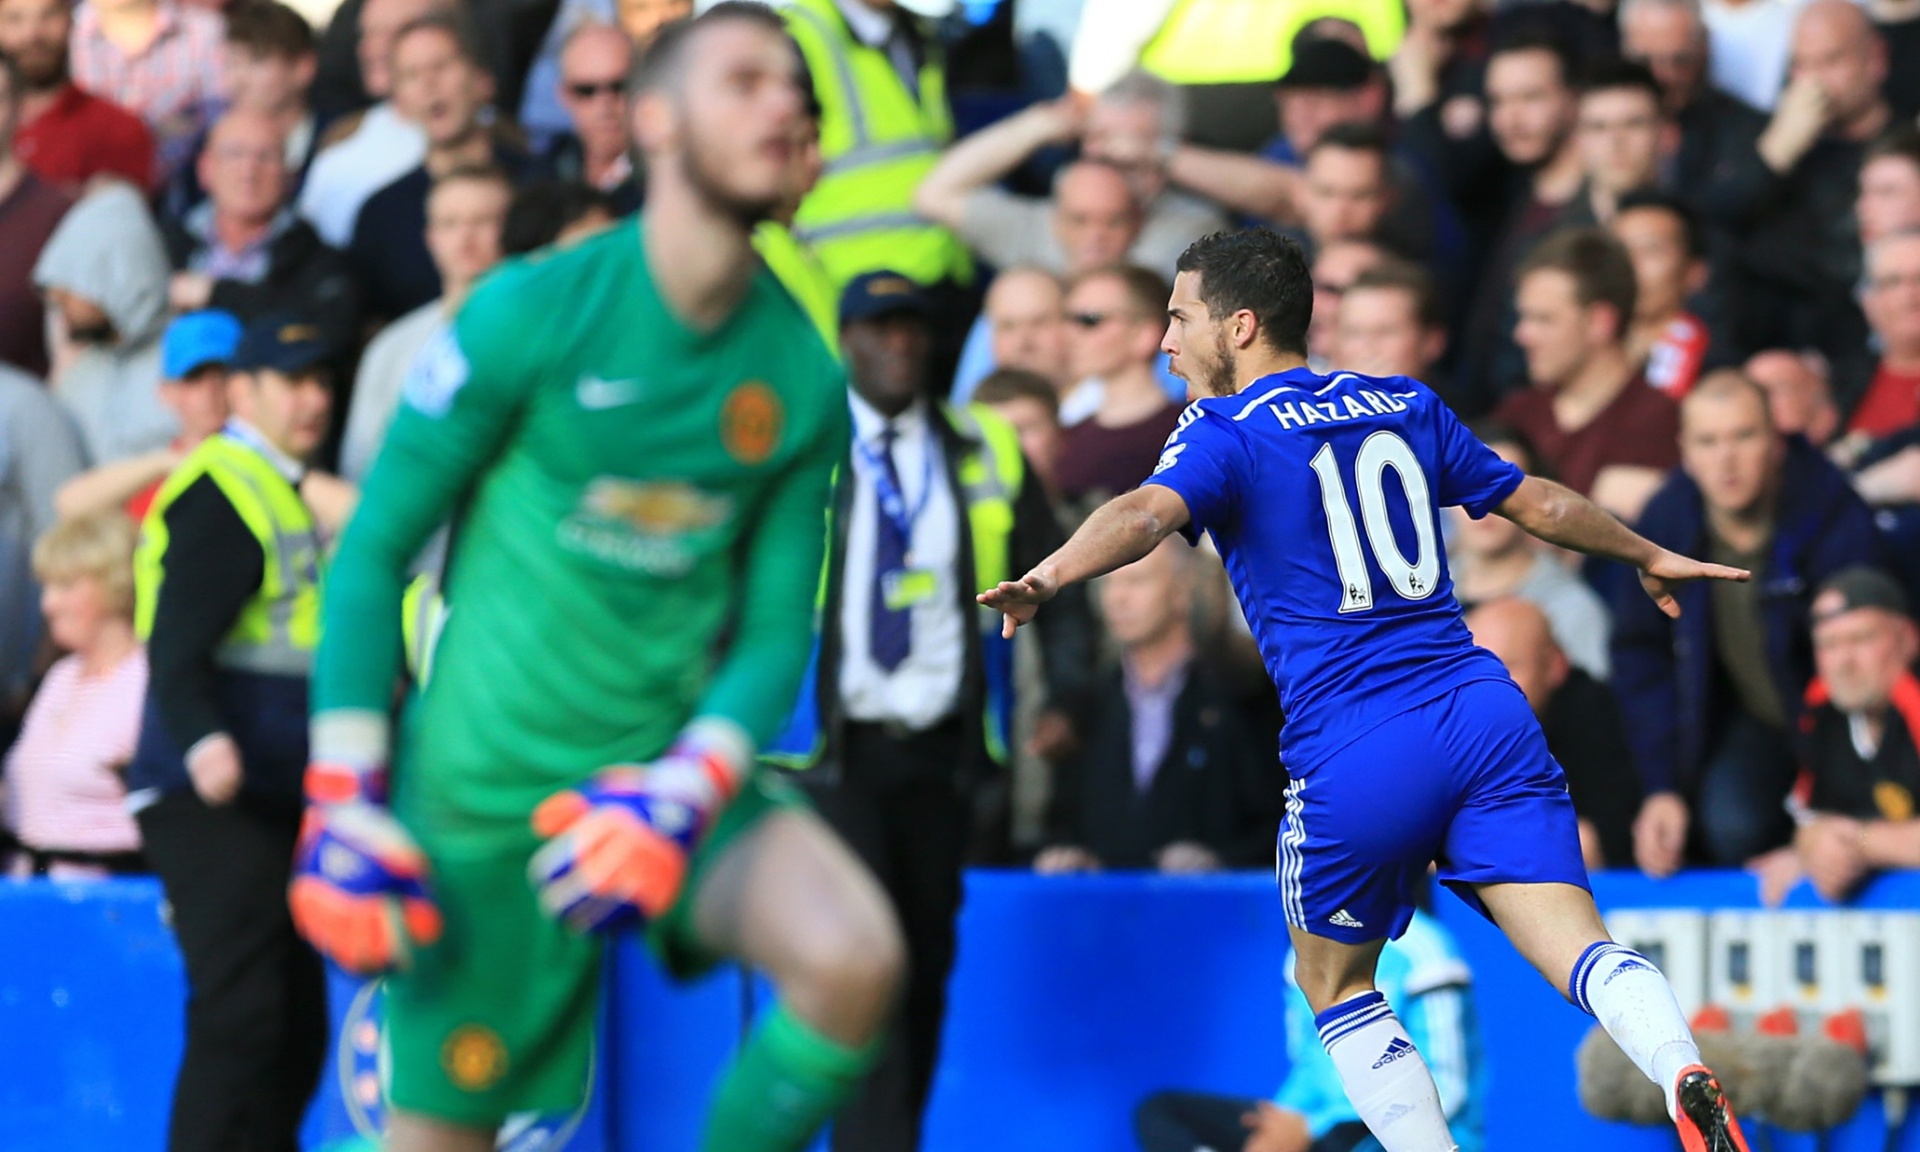 Chelsea 1-0 Manchester United - Match Report » Chelsea News